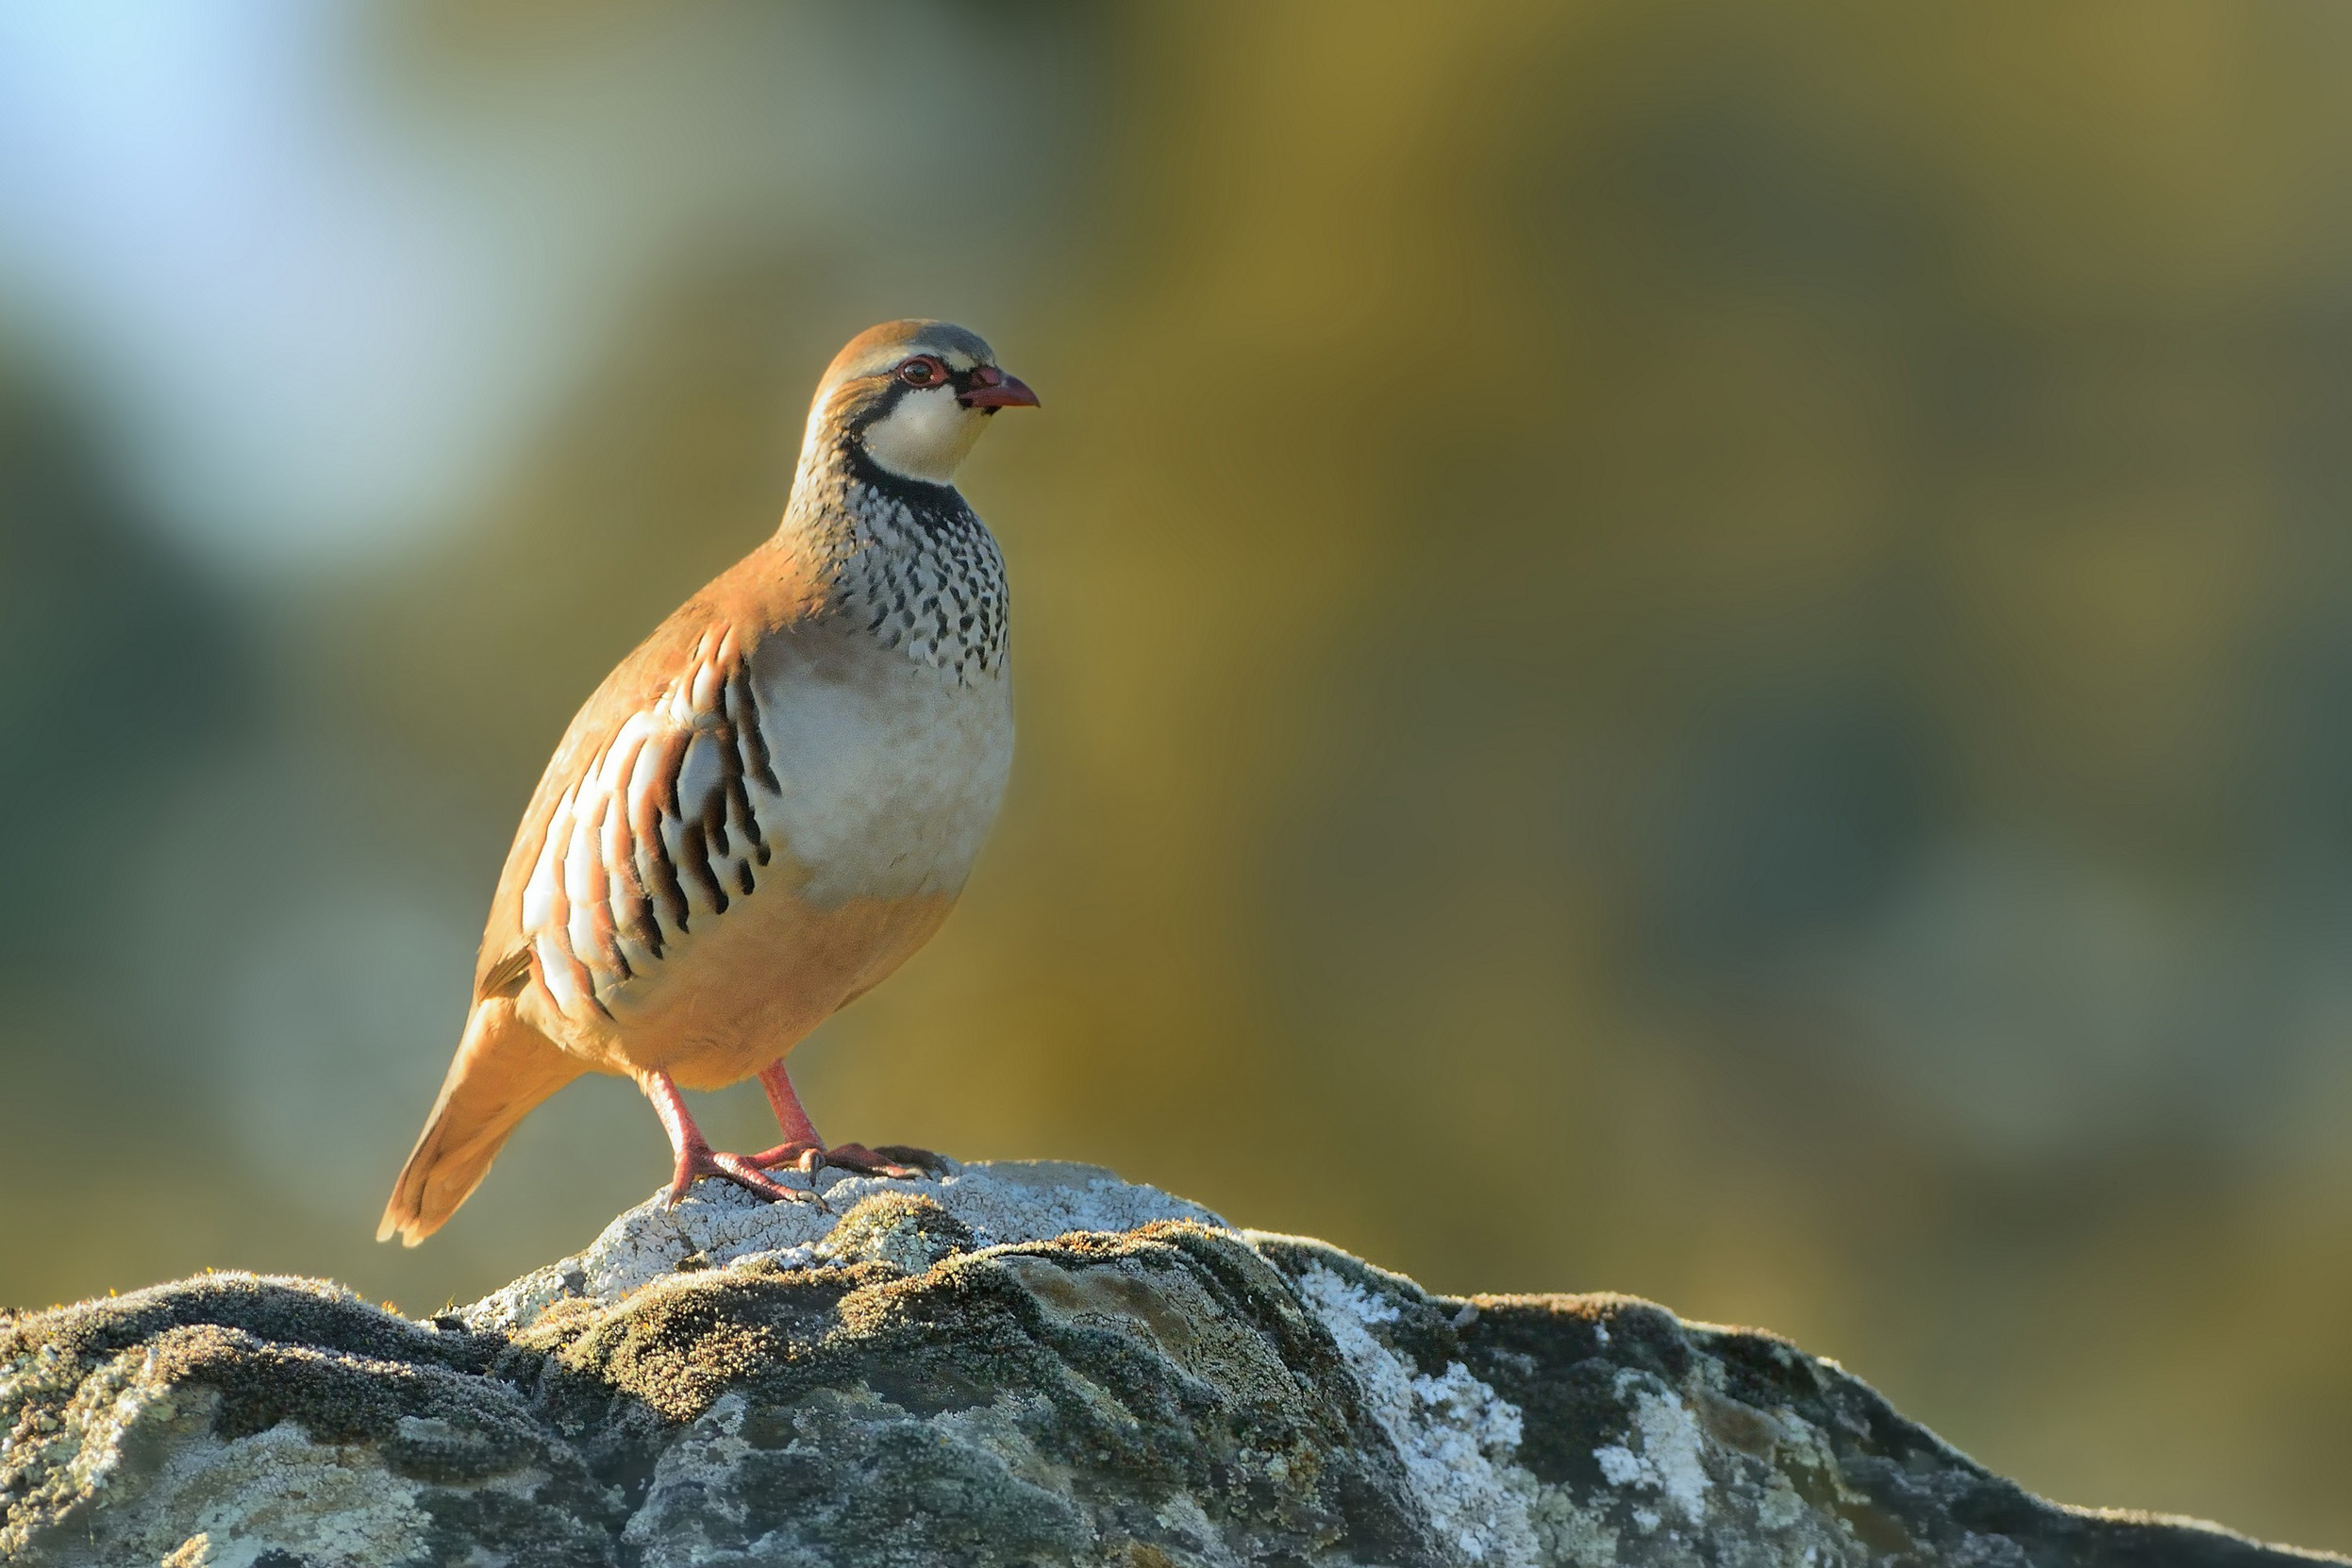 A lone Red Legged Partridge stood on top of a rock.